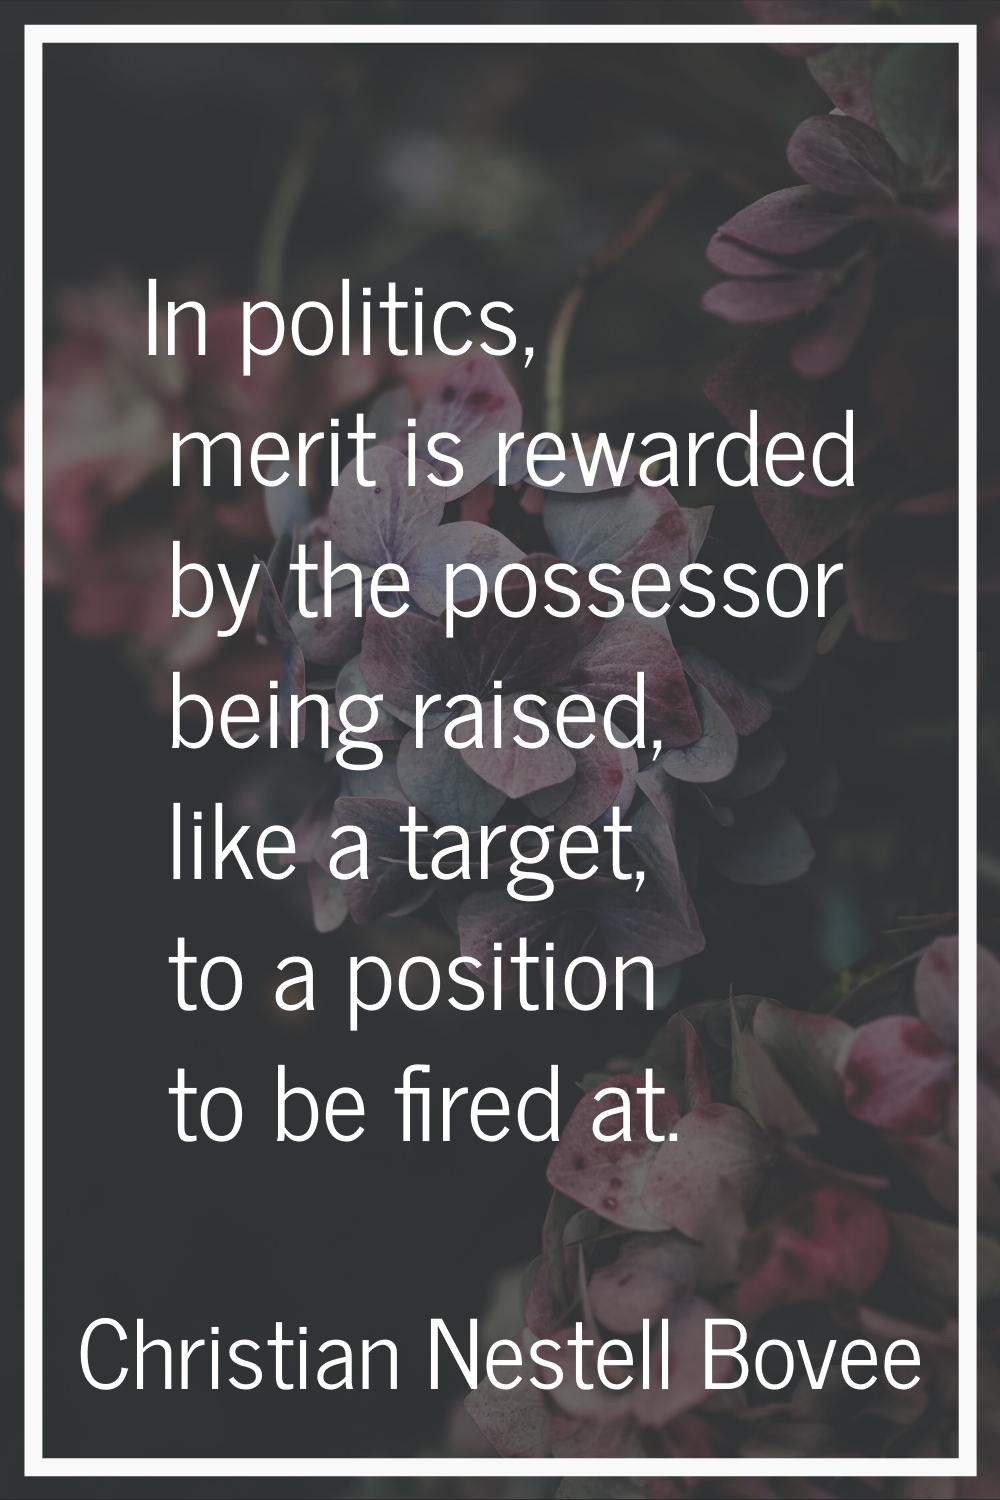 In politics, merit is rewarded by the possessor being raised, like a target, to a position to be fi